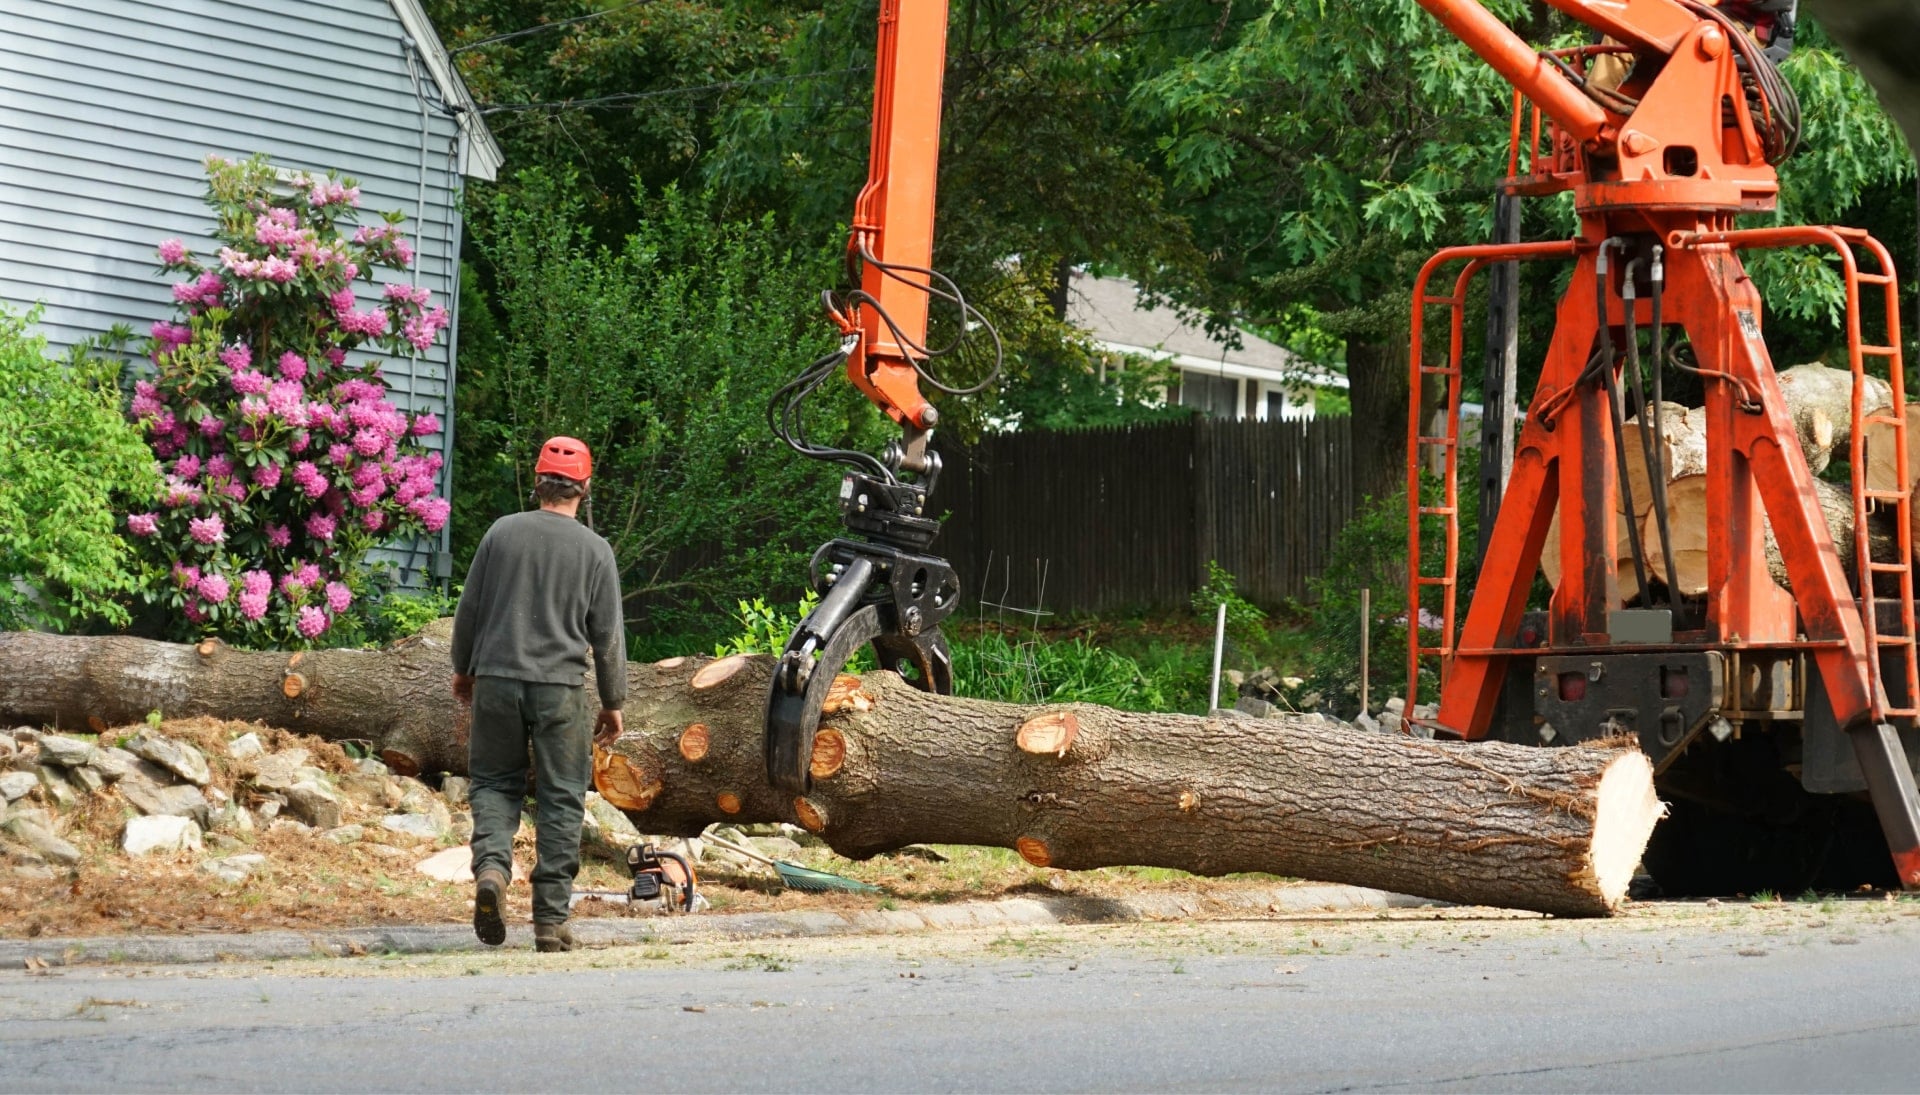 Expert tree removal service worker uses machine to pick up stump in Birmingham, Alabama